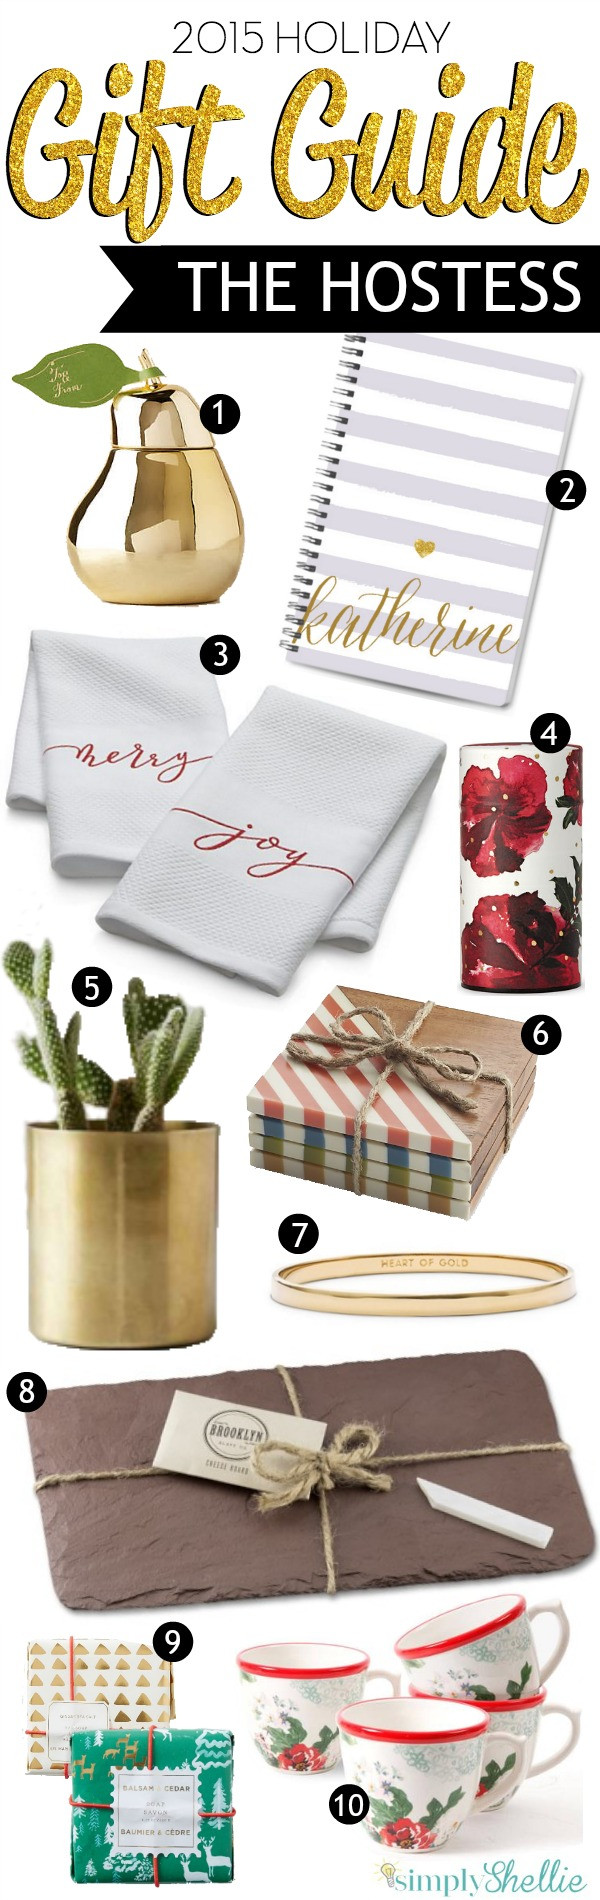 Holiday Host Gift Ideas
 Holiday Gift Guide Fabulous Hostess Gift Ideas